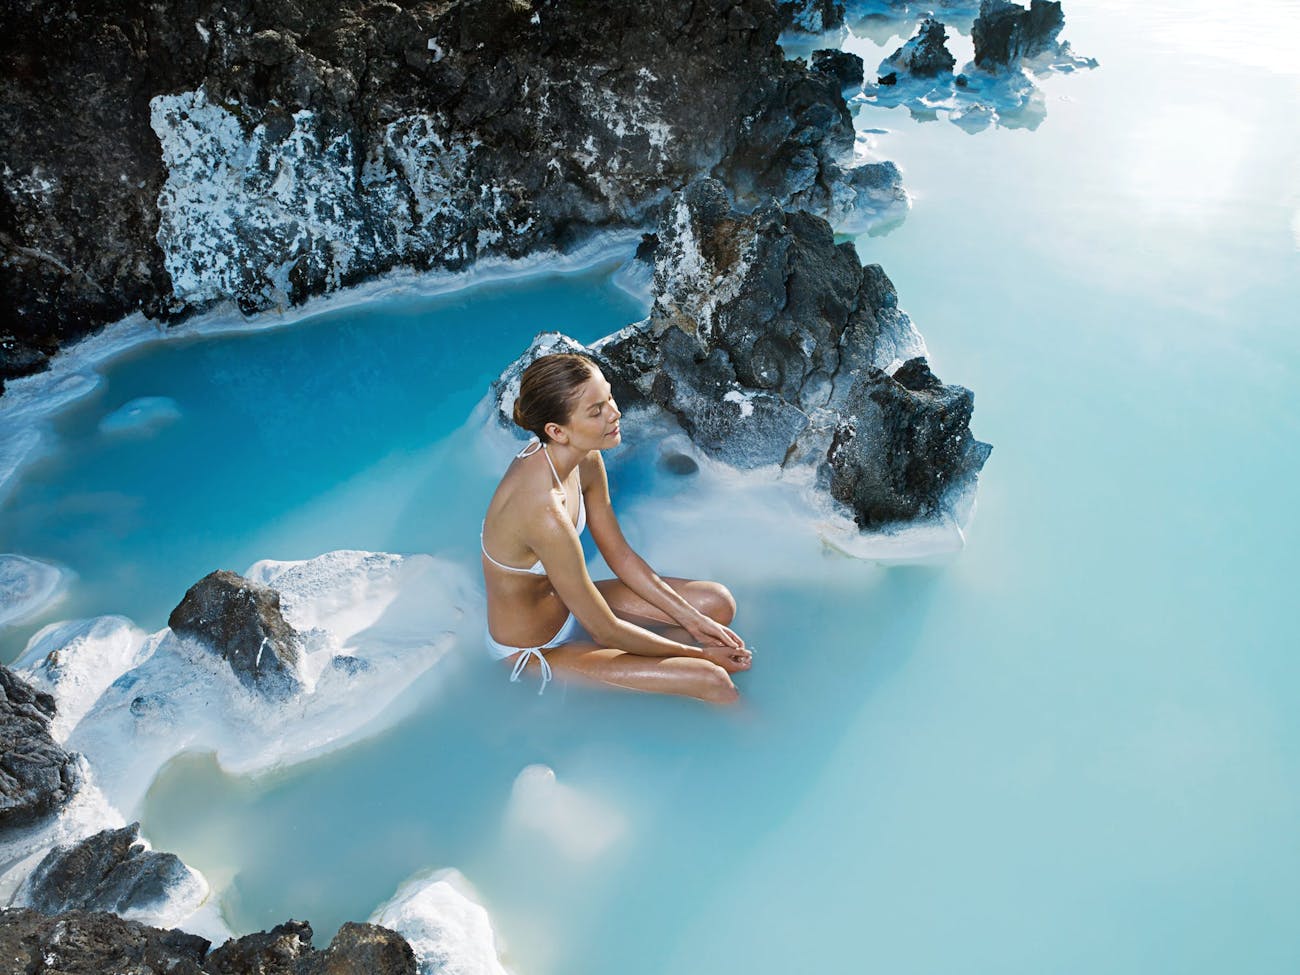 Nudism Culture Girls - When You Have to Get Naked in Iceland | Guide to Iceland